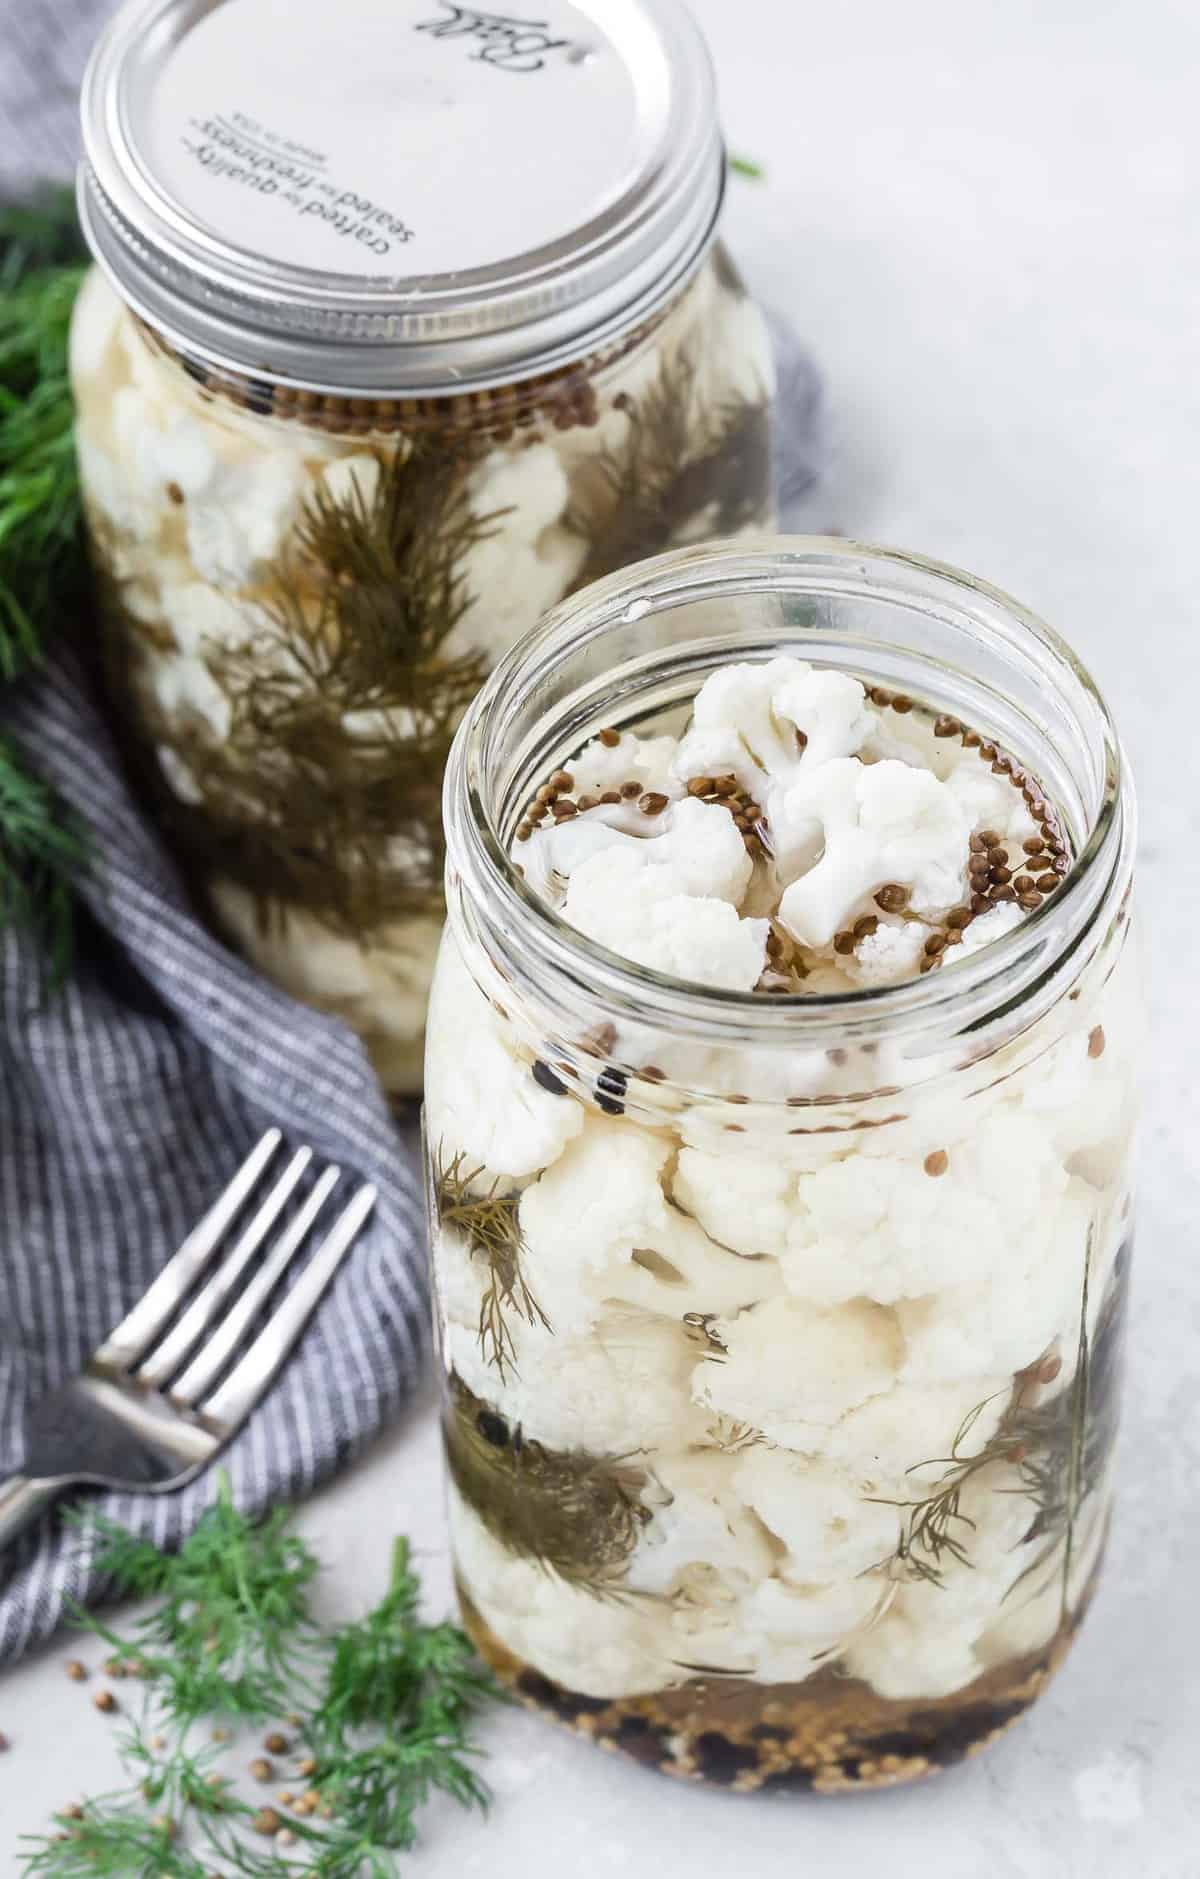 Two jars of pickled cauliflower, a fork is also pictured.